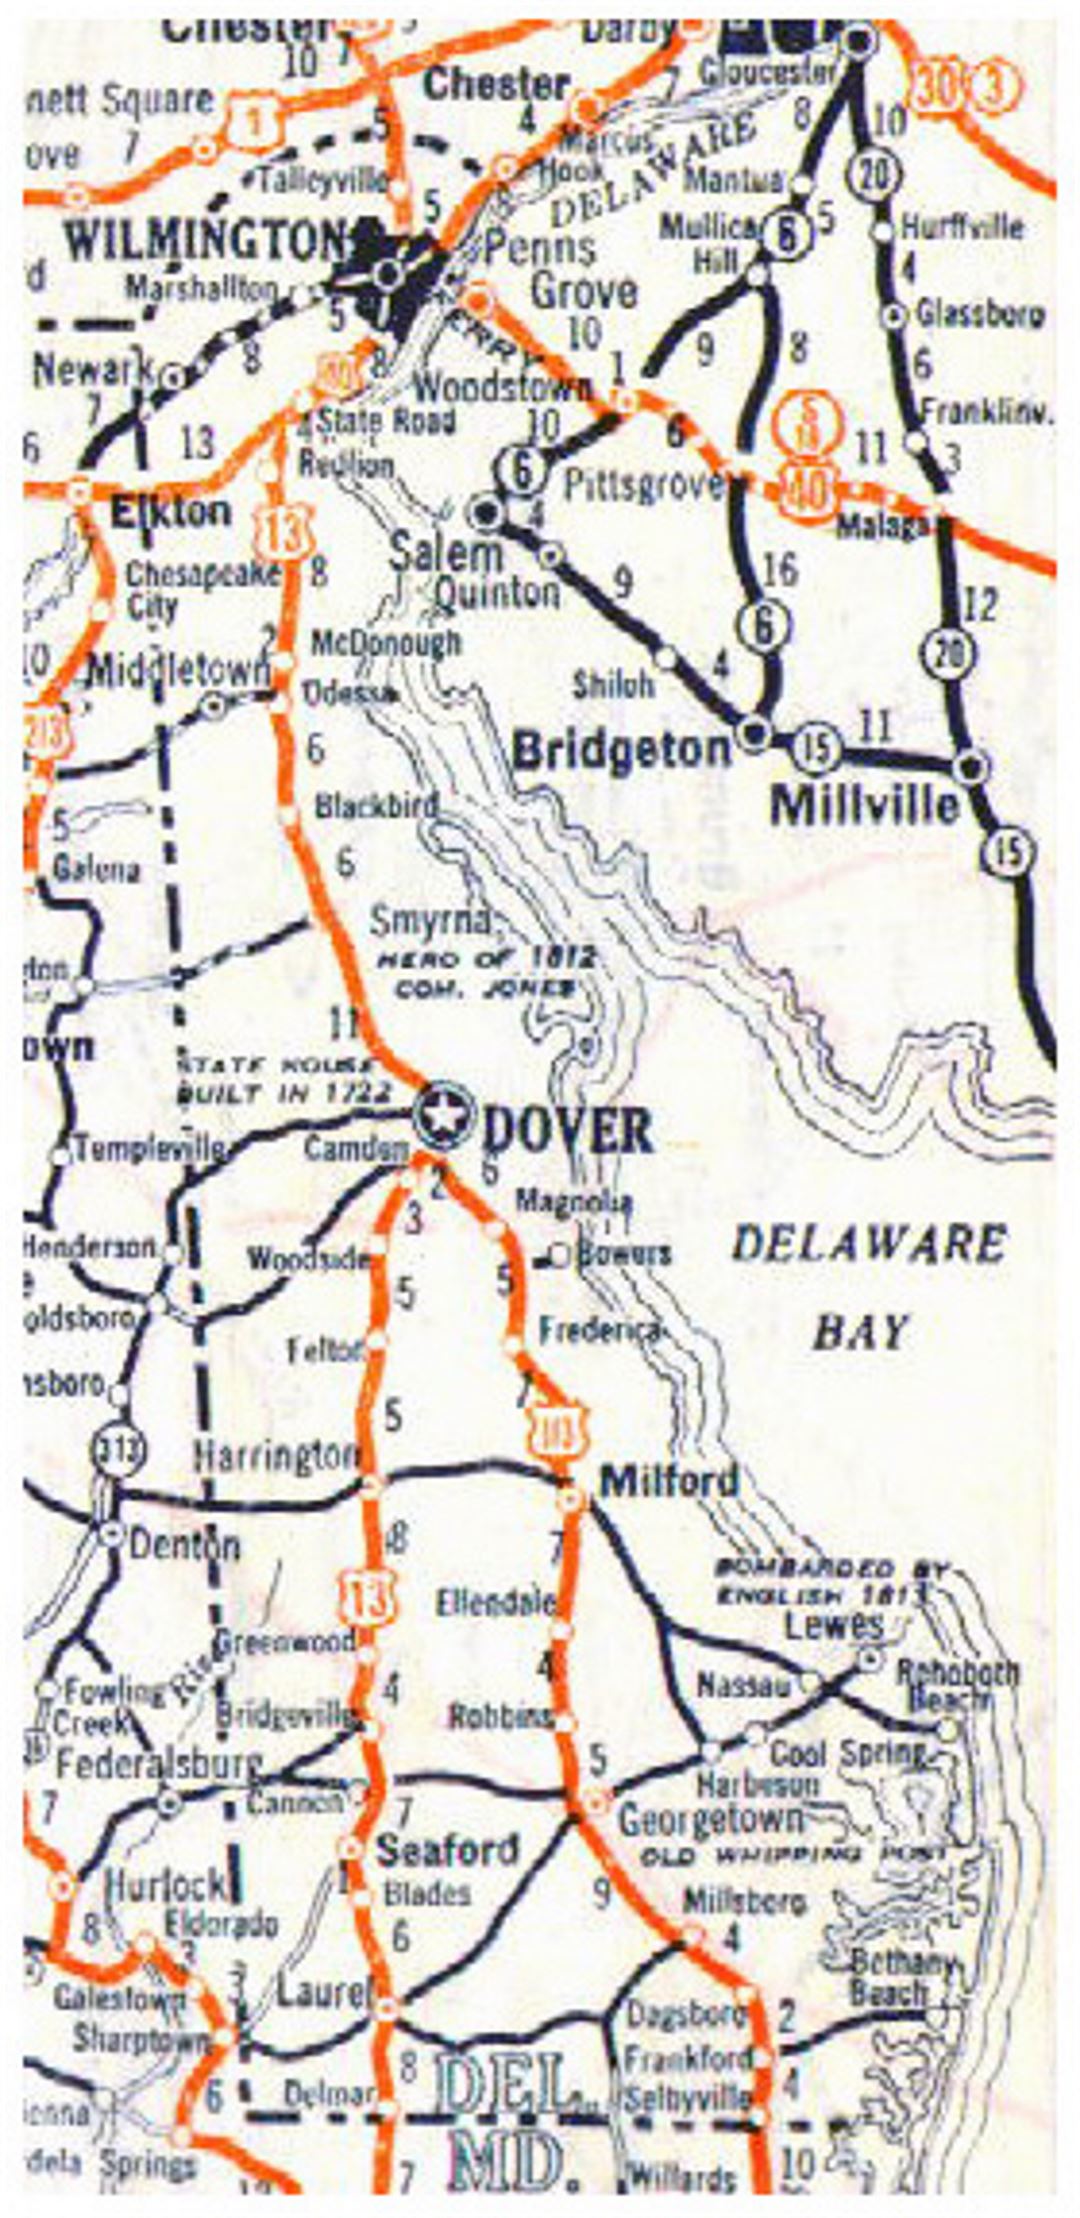 Small roads and highways map of Delaware state - 1928